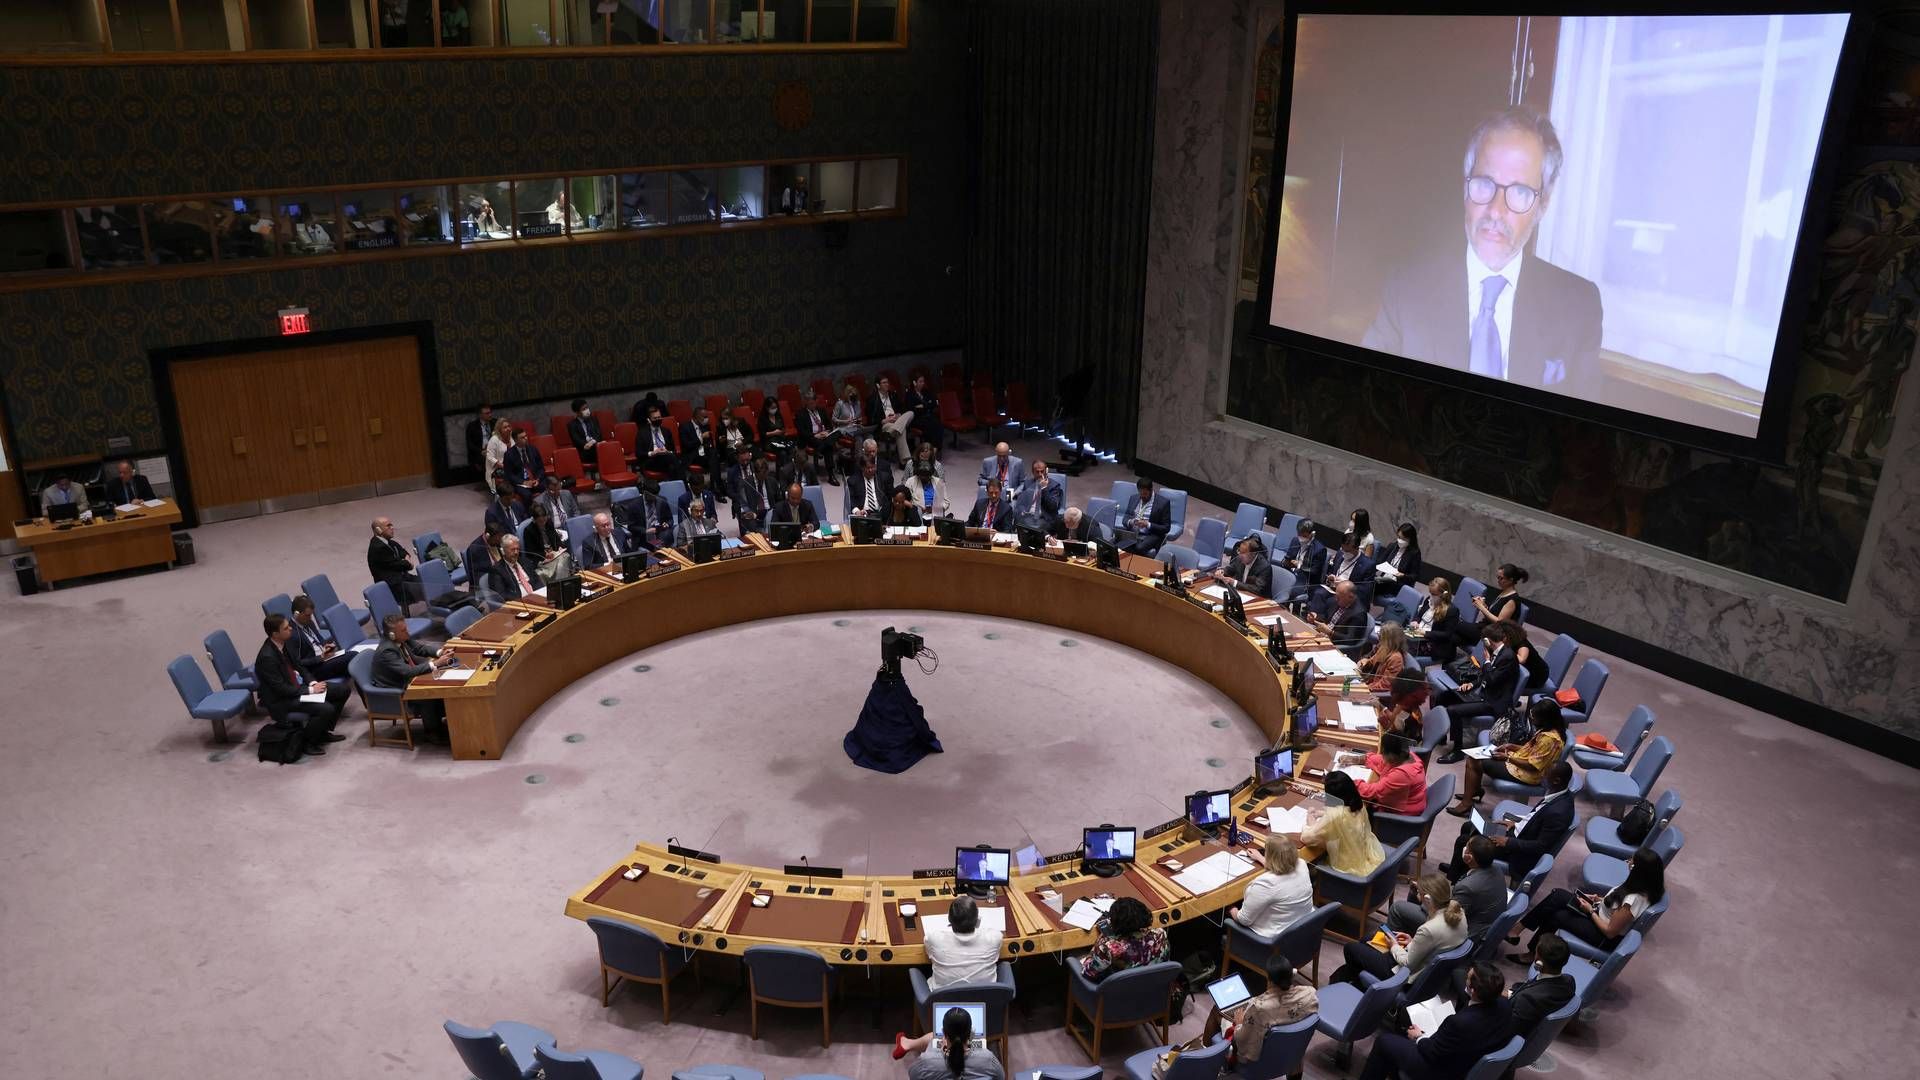 IAEA Director General Rafael Grossi digitally addressed the UN Security Council in New York City on Thursday. | Photo: Andrew Kelly/REUTERS / X02844